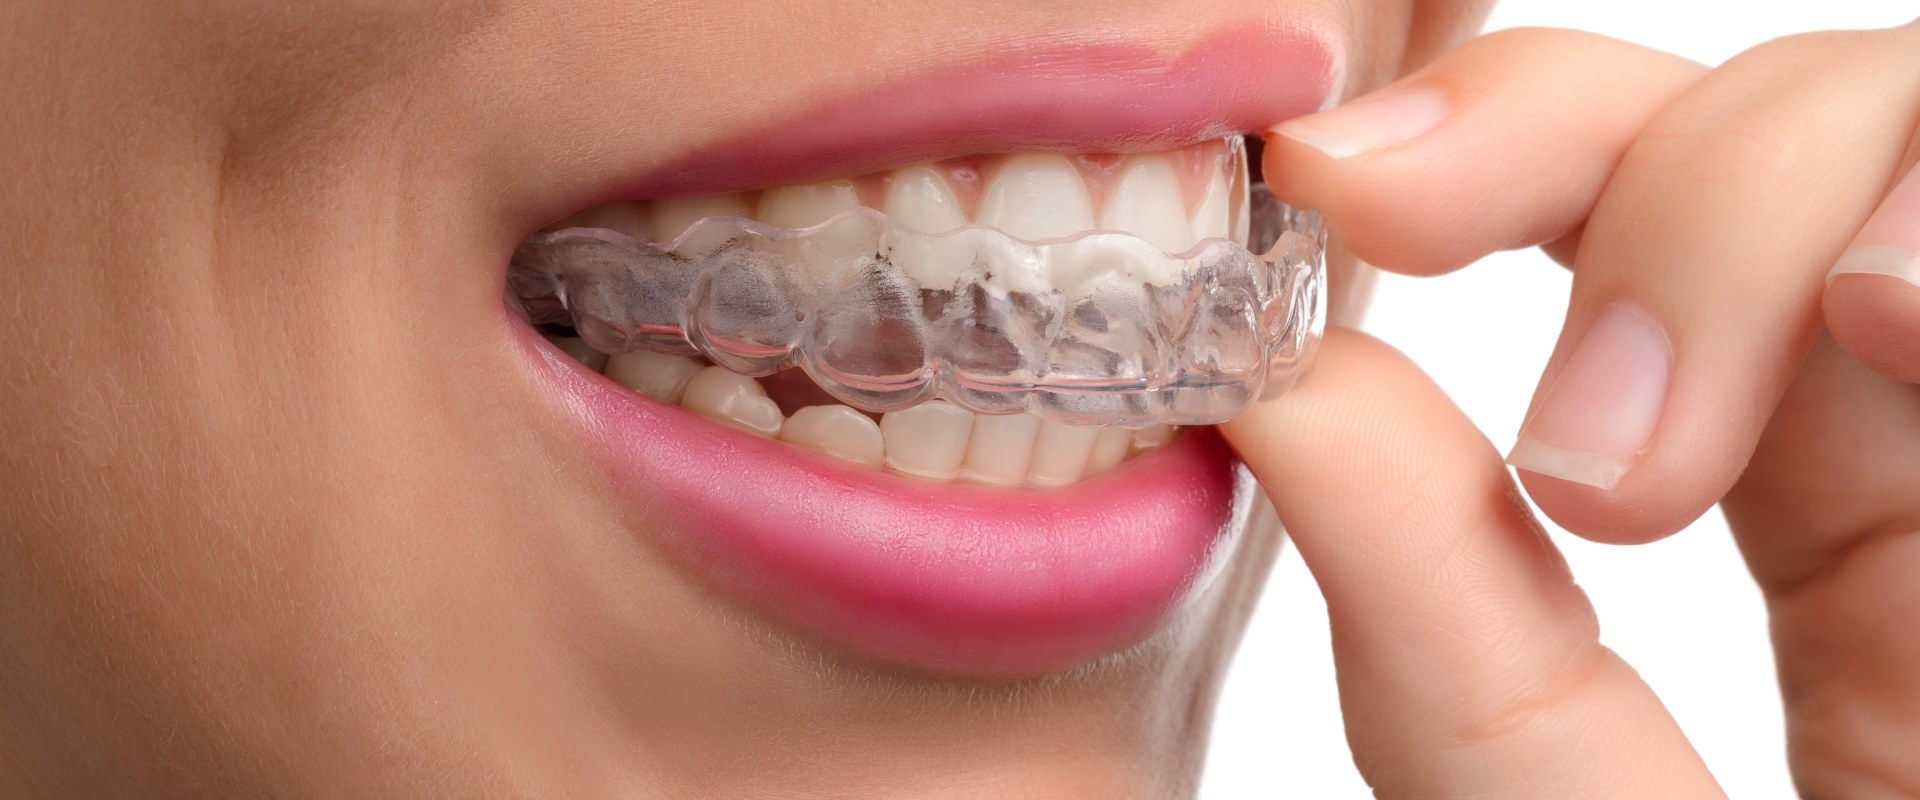 Can Invisalign Cause Permanent Damage?